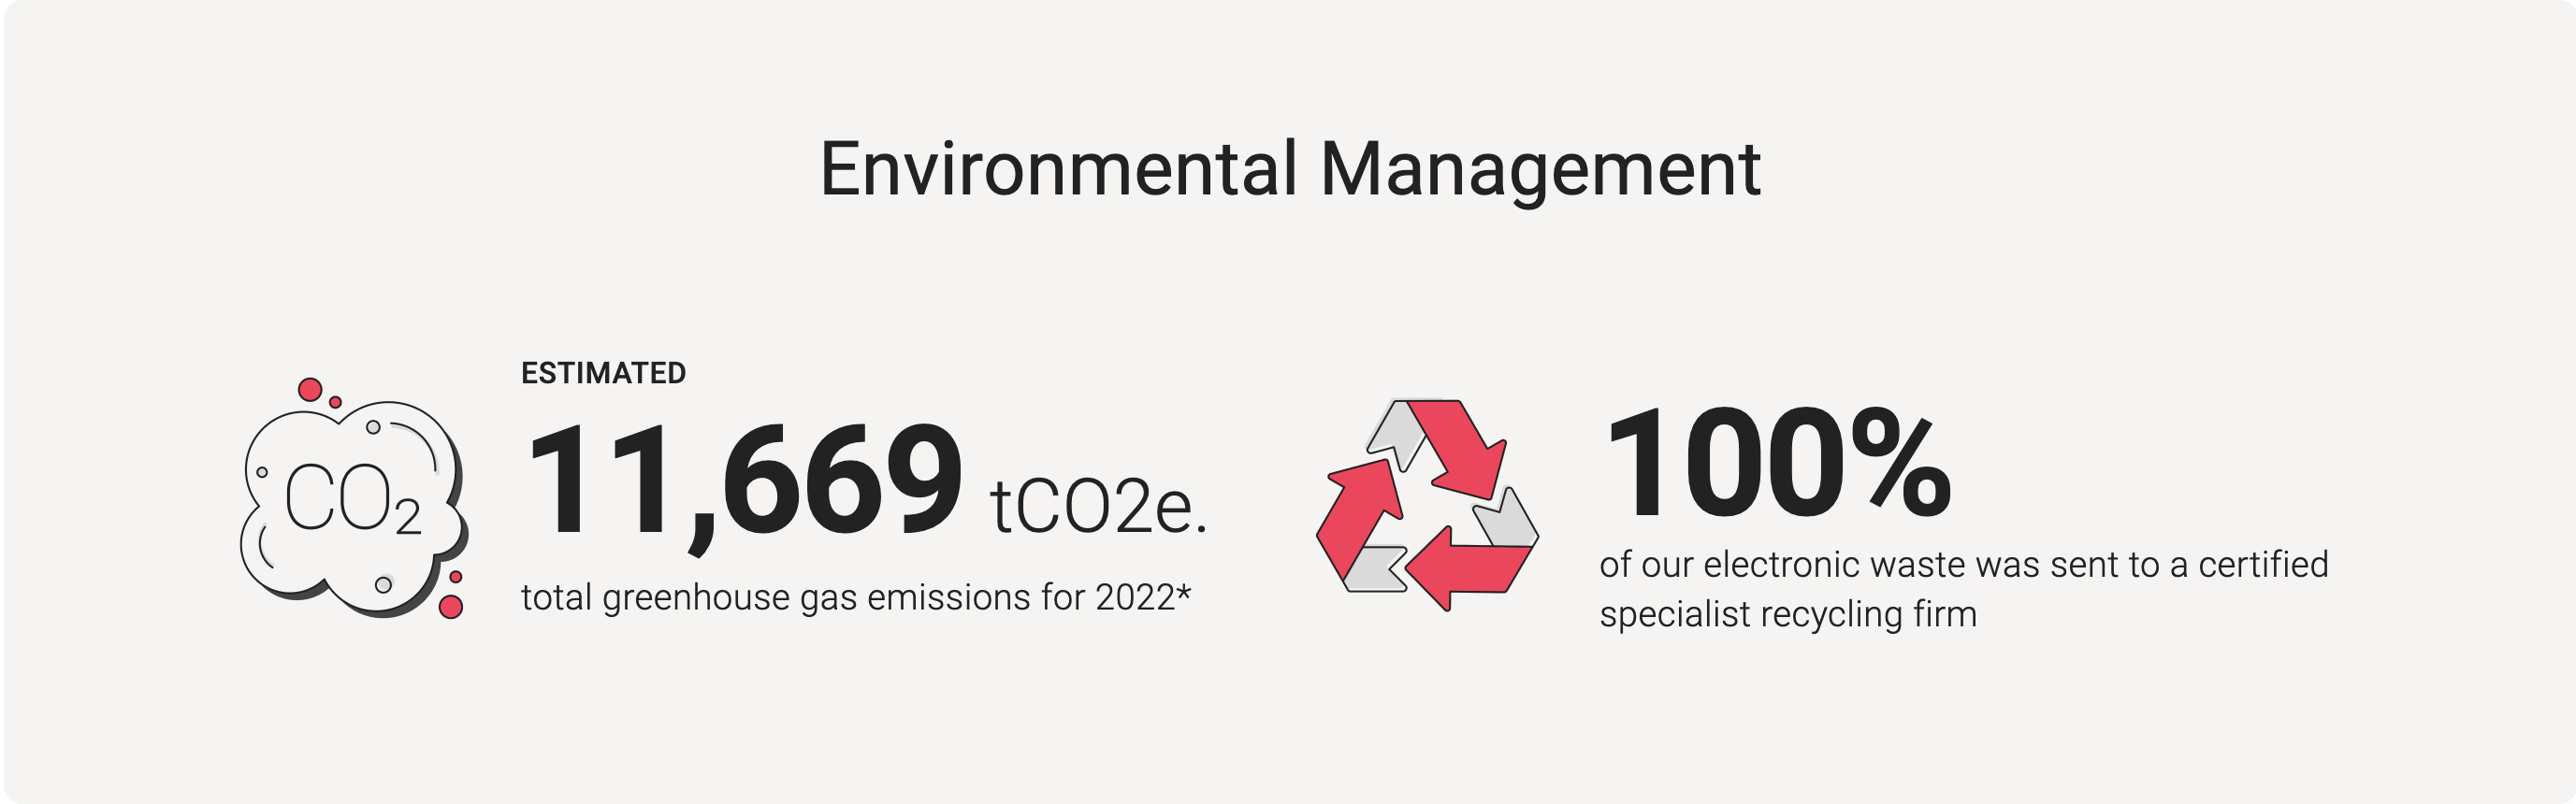 Environmental Management - Estimated 14,079 tCO2e total total greenhouse gas emissions for 2021. Estimated 60% of our paper, cardboard, metal, and plastics